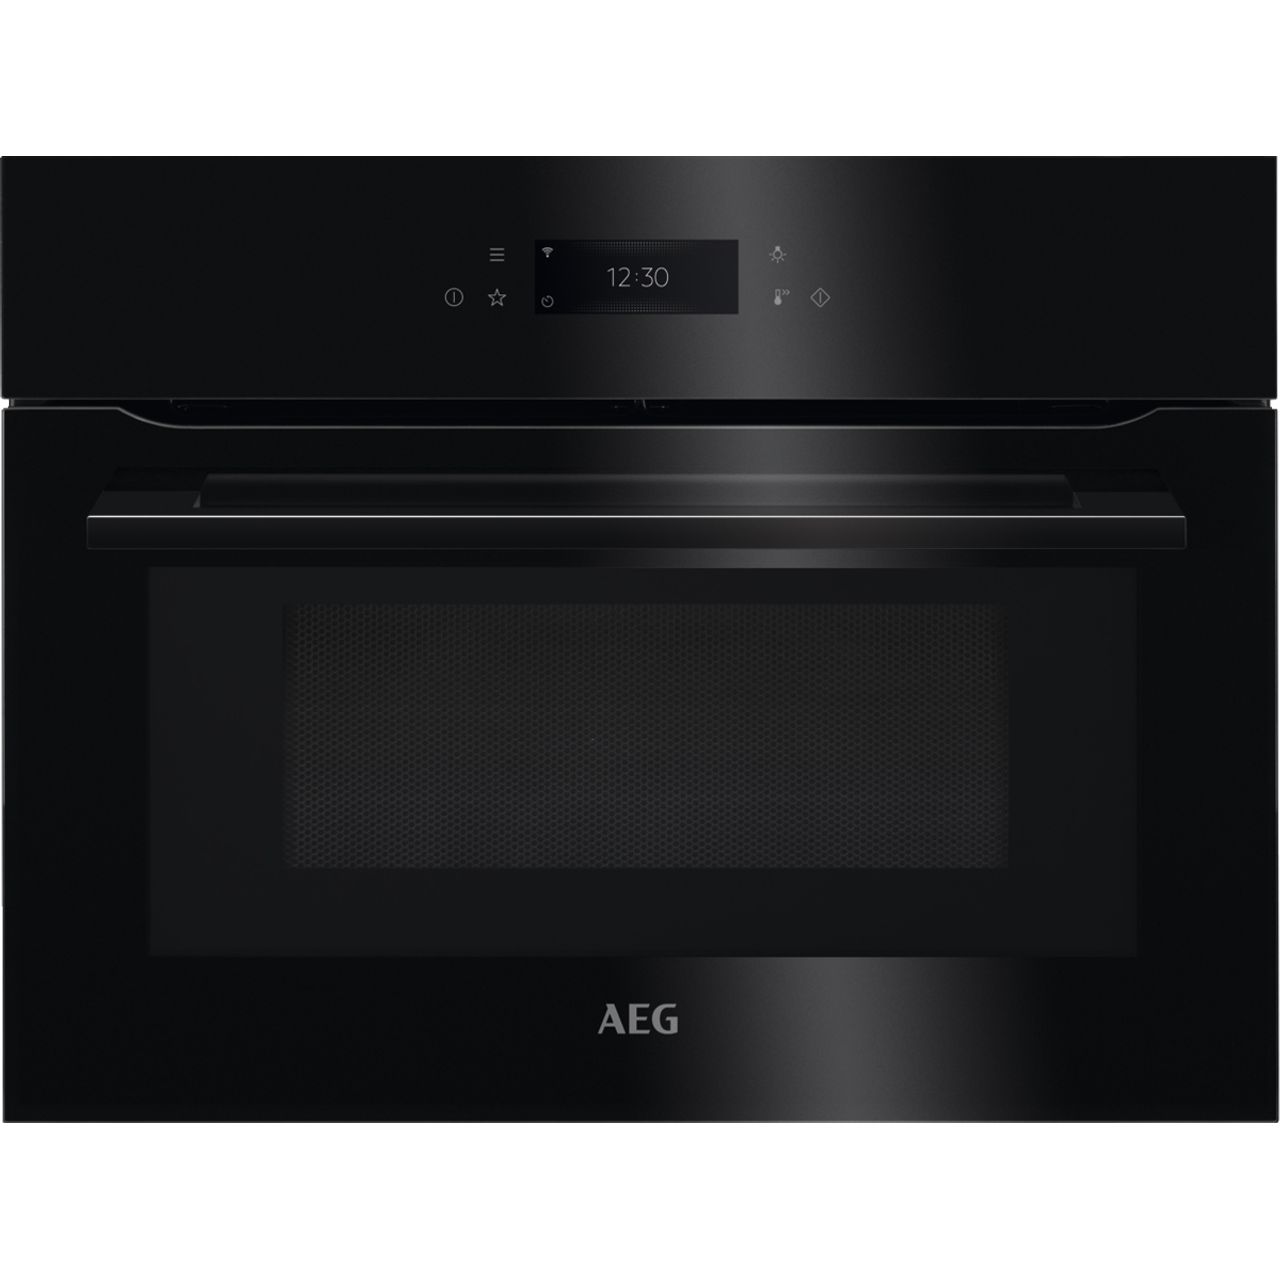 AEG KMK768080B Wifi Connected Built In Compact Electric Single Oven with Microwave Function Review